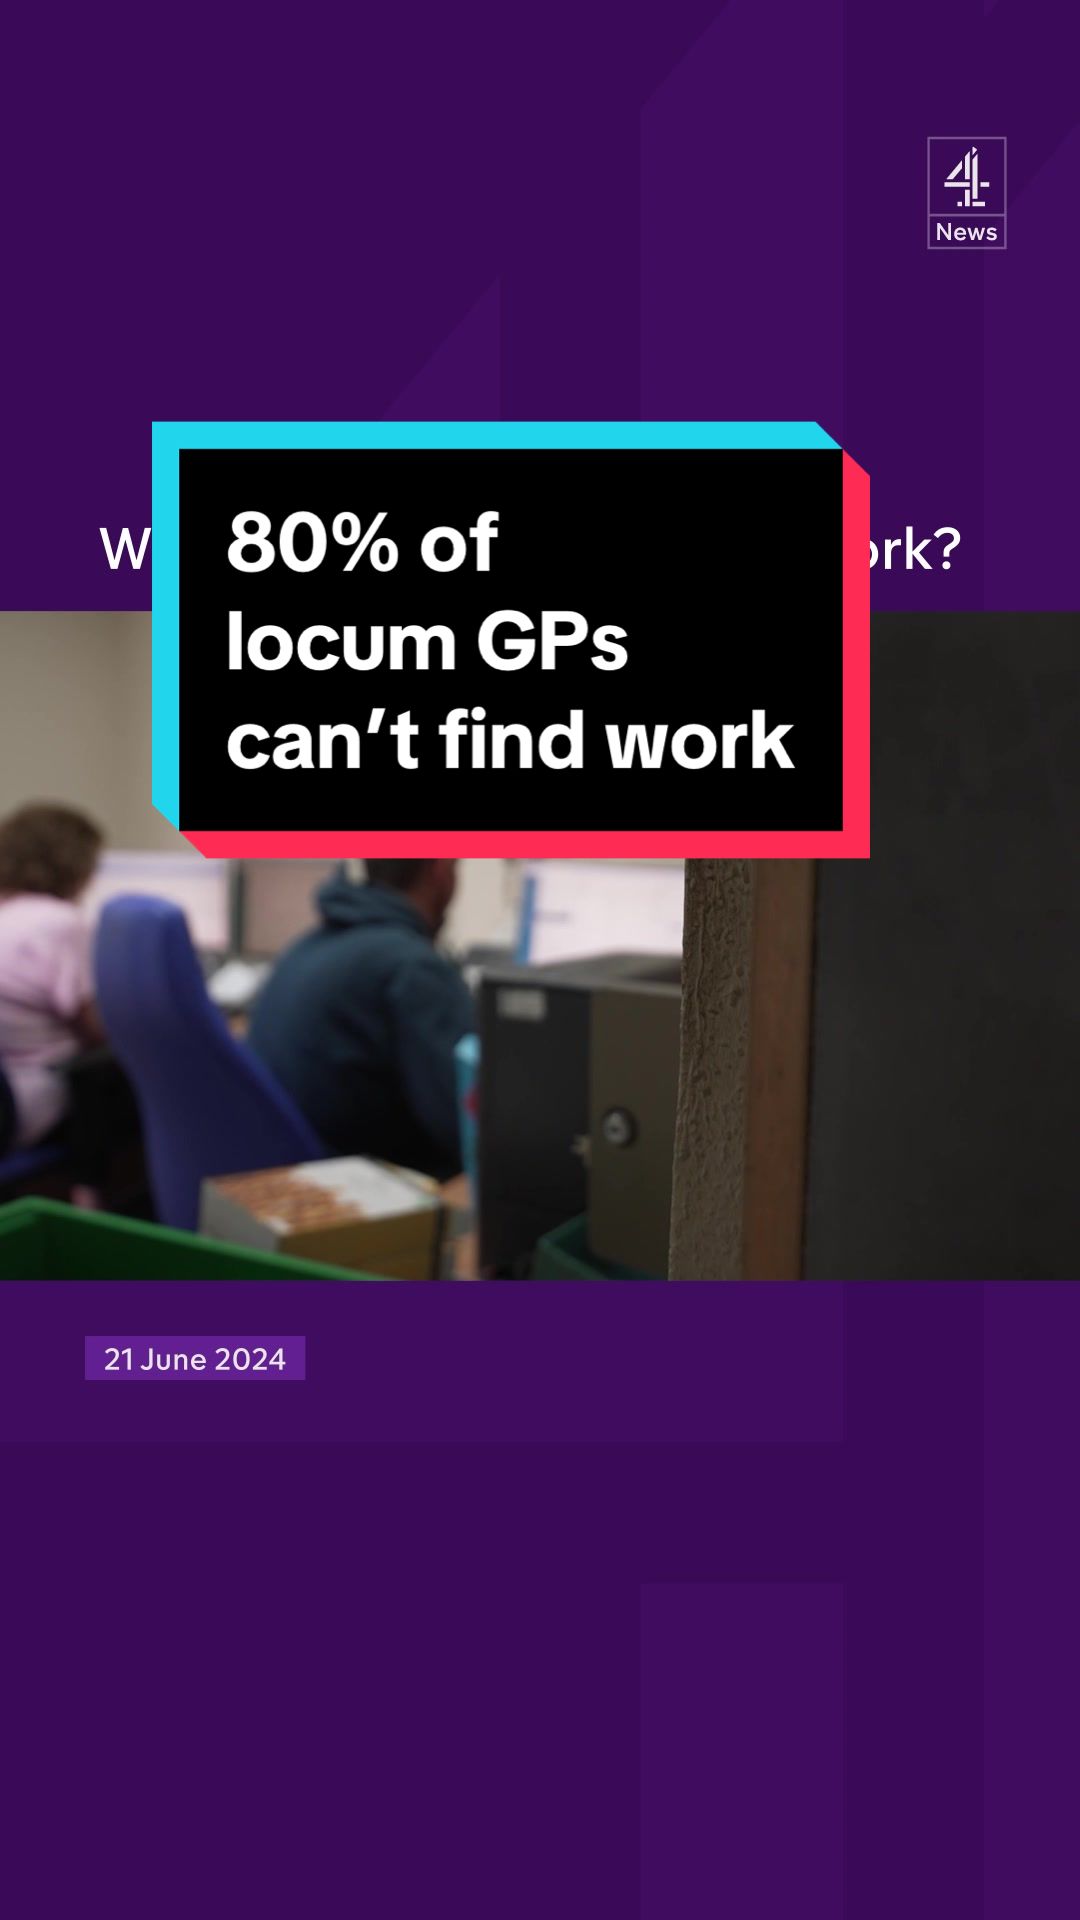 More than 80% of locum GPs in England cannot find work in surgeries according to a survey by the British Medical Association. This comes as patients complain they cannot get appointments for weeks on end. #LocumGP #GP #NHSEngland #Health #C4News #Channel4News